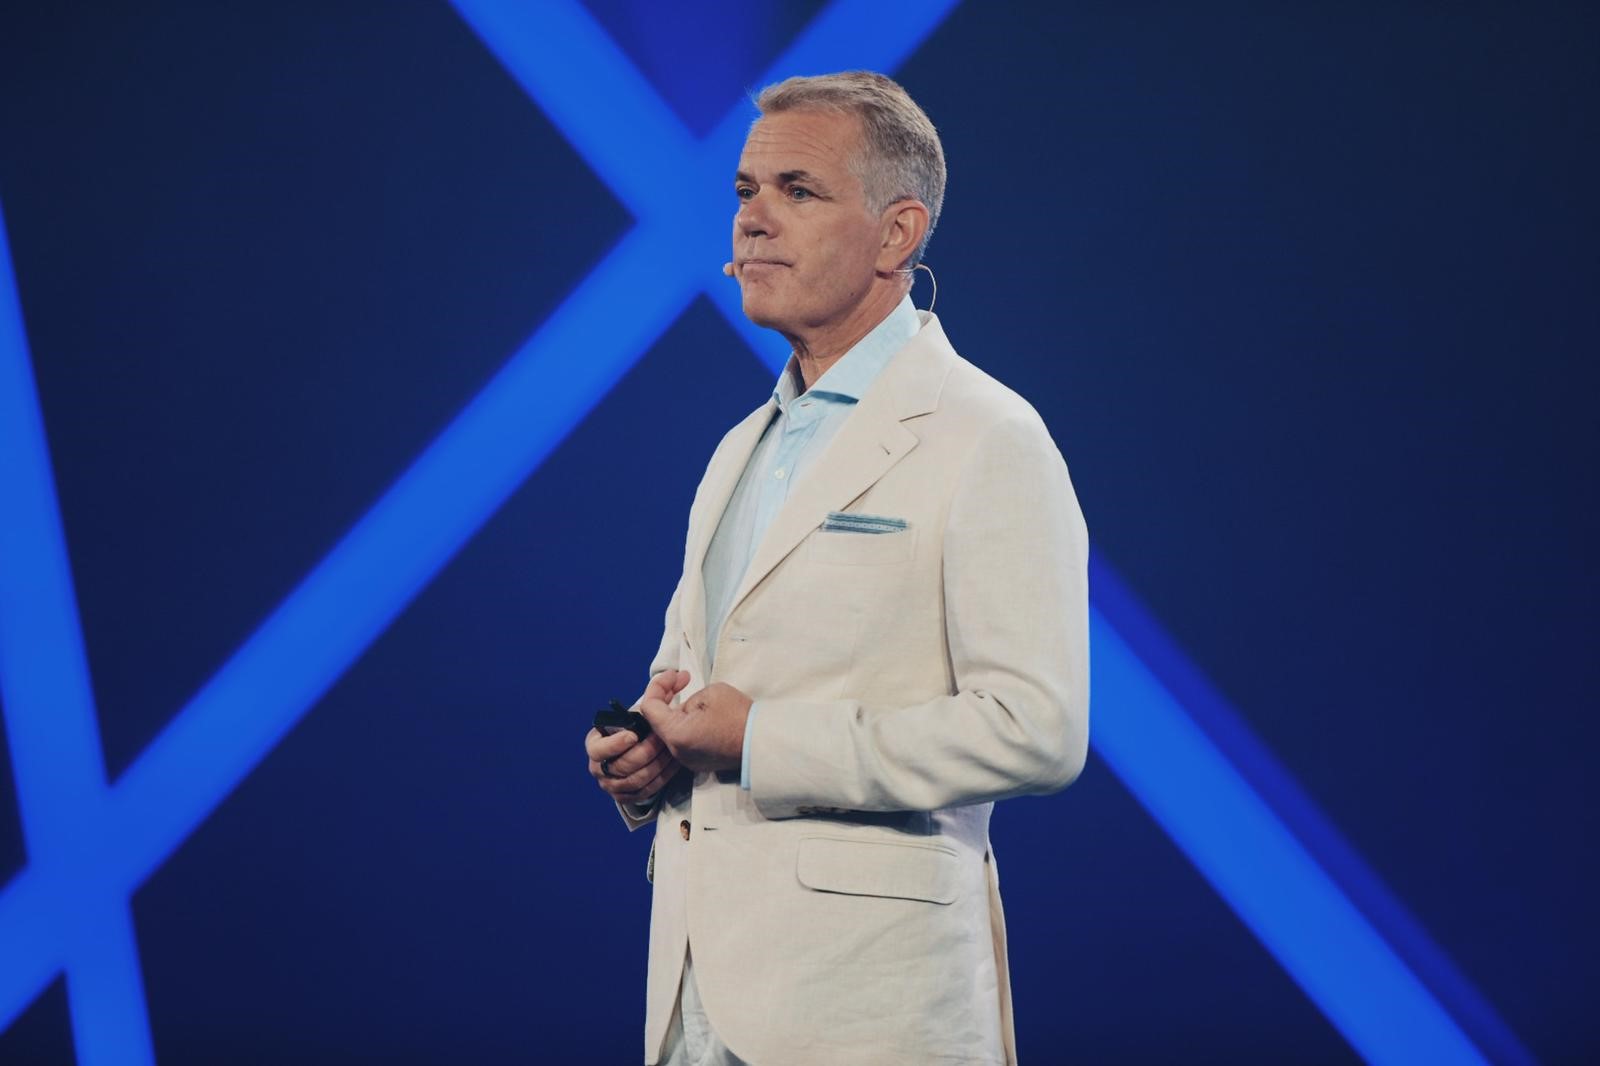 HxGN Spotlight | HxGN LIVE Global 2022: Hexagon CEO proclaims “what stands in the way becomes the way” for sustainability